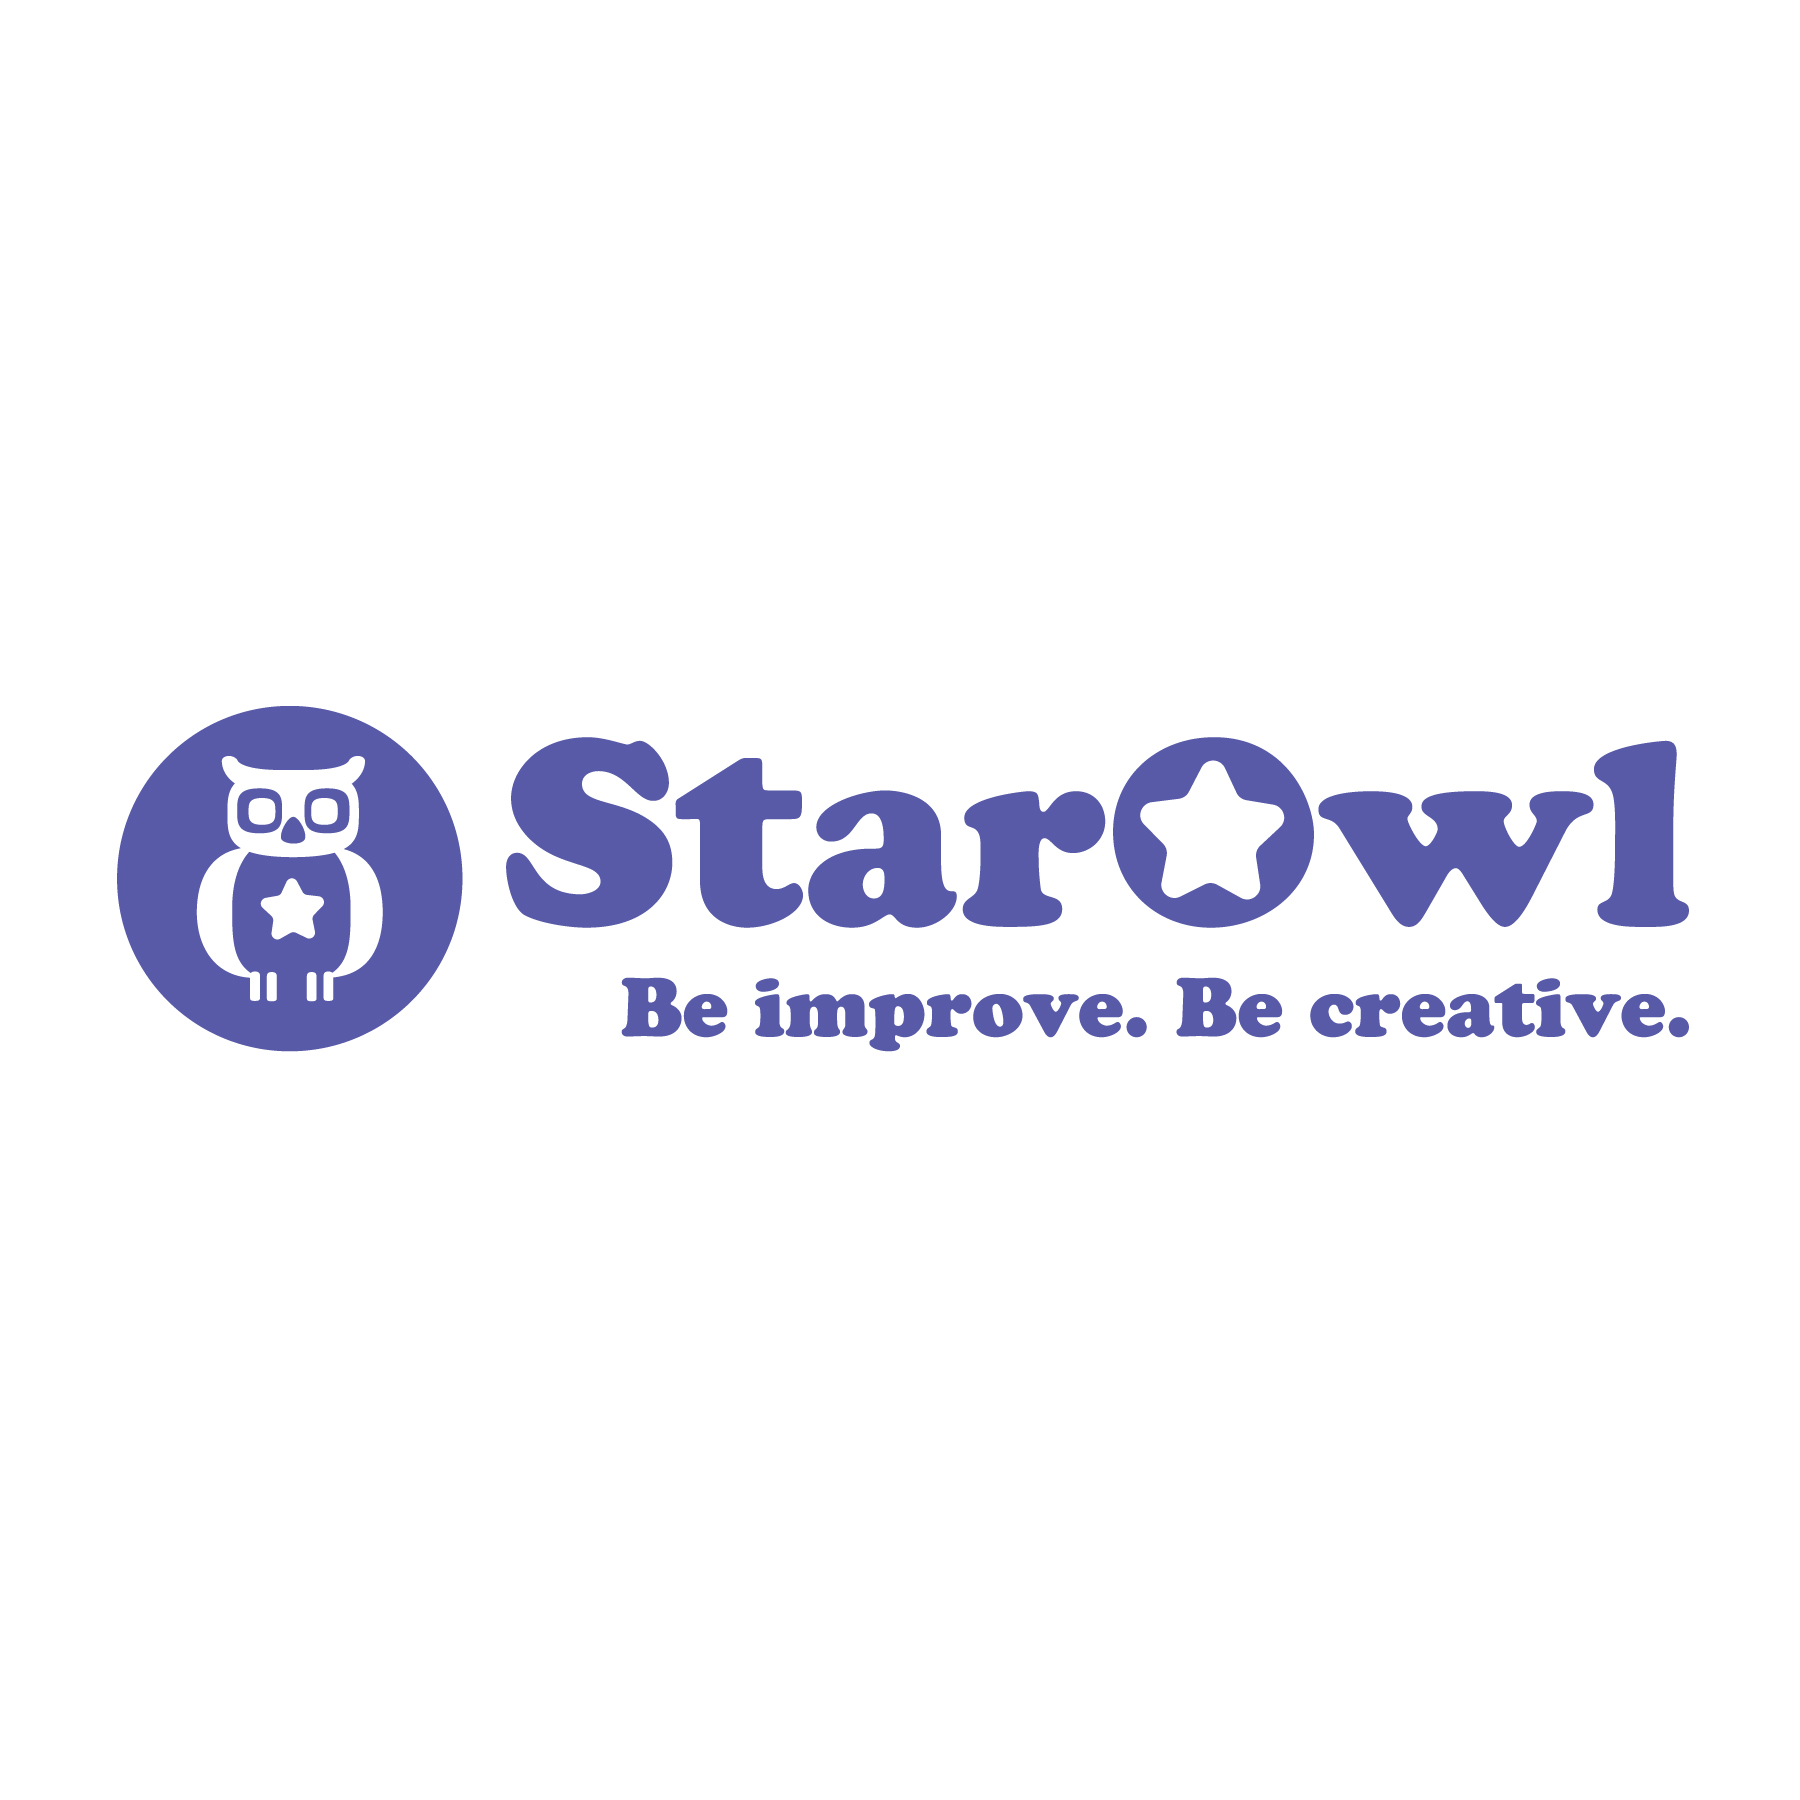 StarOwl Logo Design logo design by logo designer Dandelion Studio for your inspiration and for the worlds largest logo competition